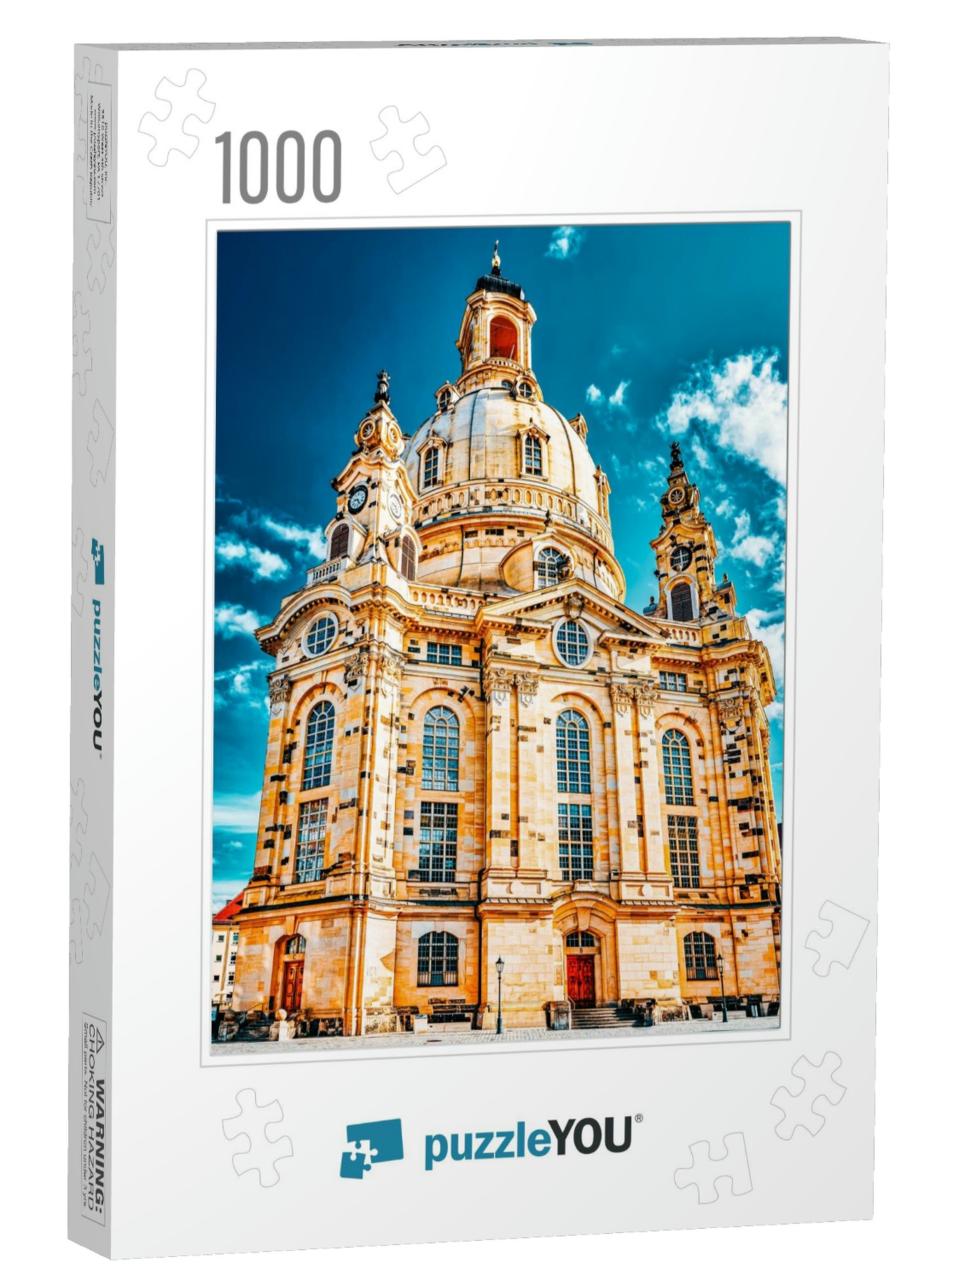 Dresden Frauenkirche Church of Our Lady is a Lutheran Chu... Jigsaw Puzzle with 1000 pieces